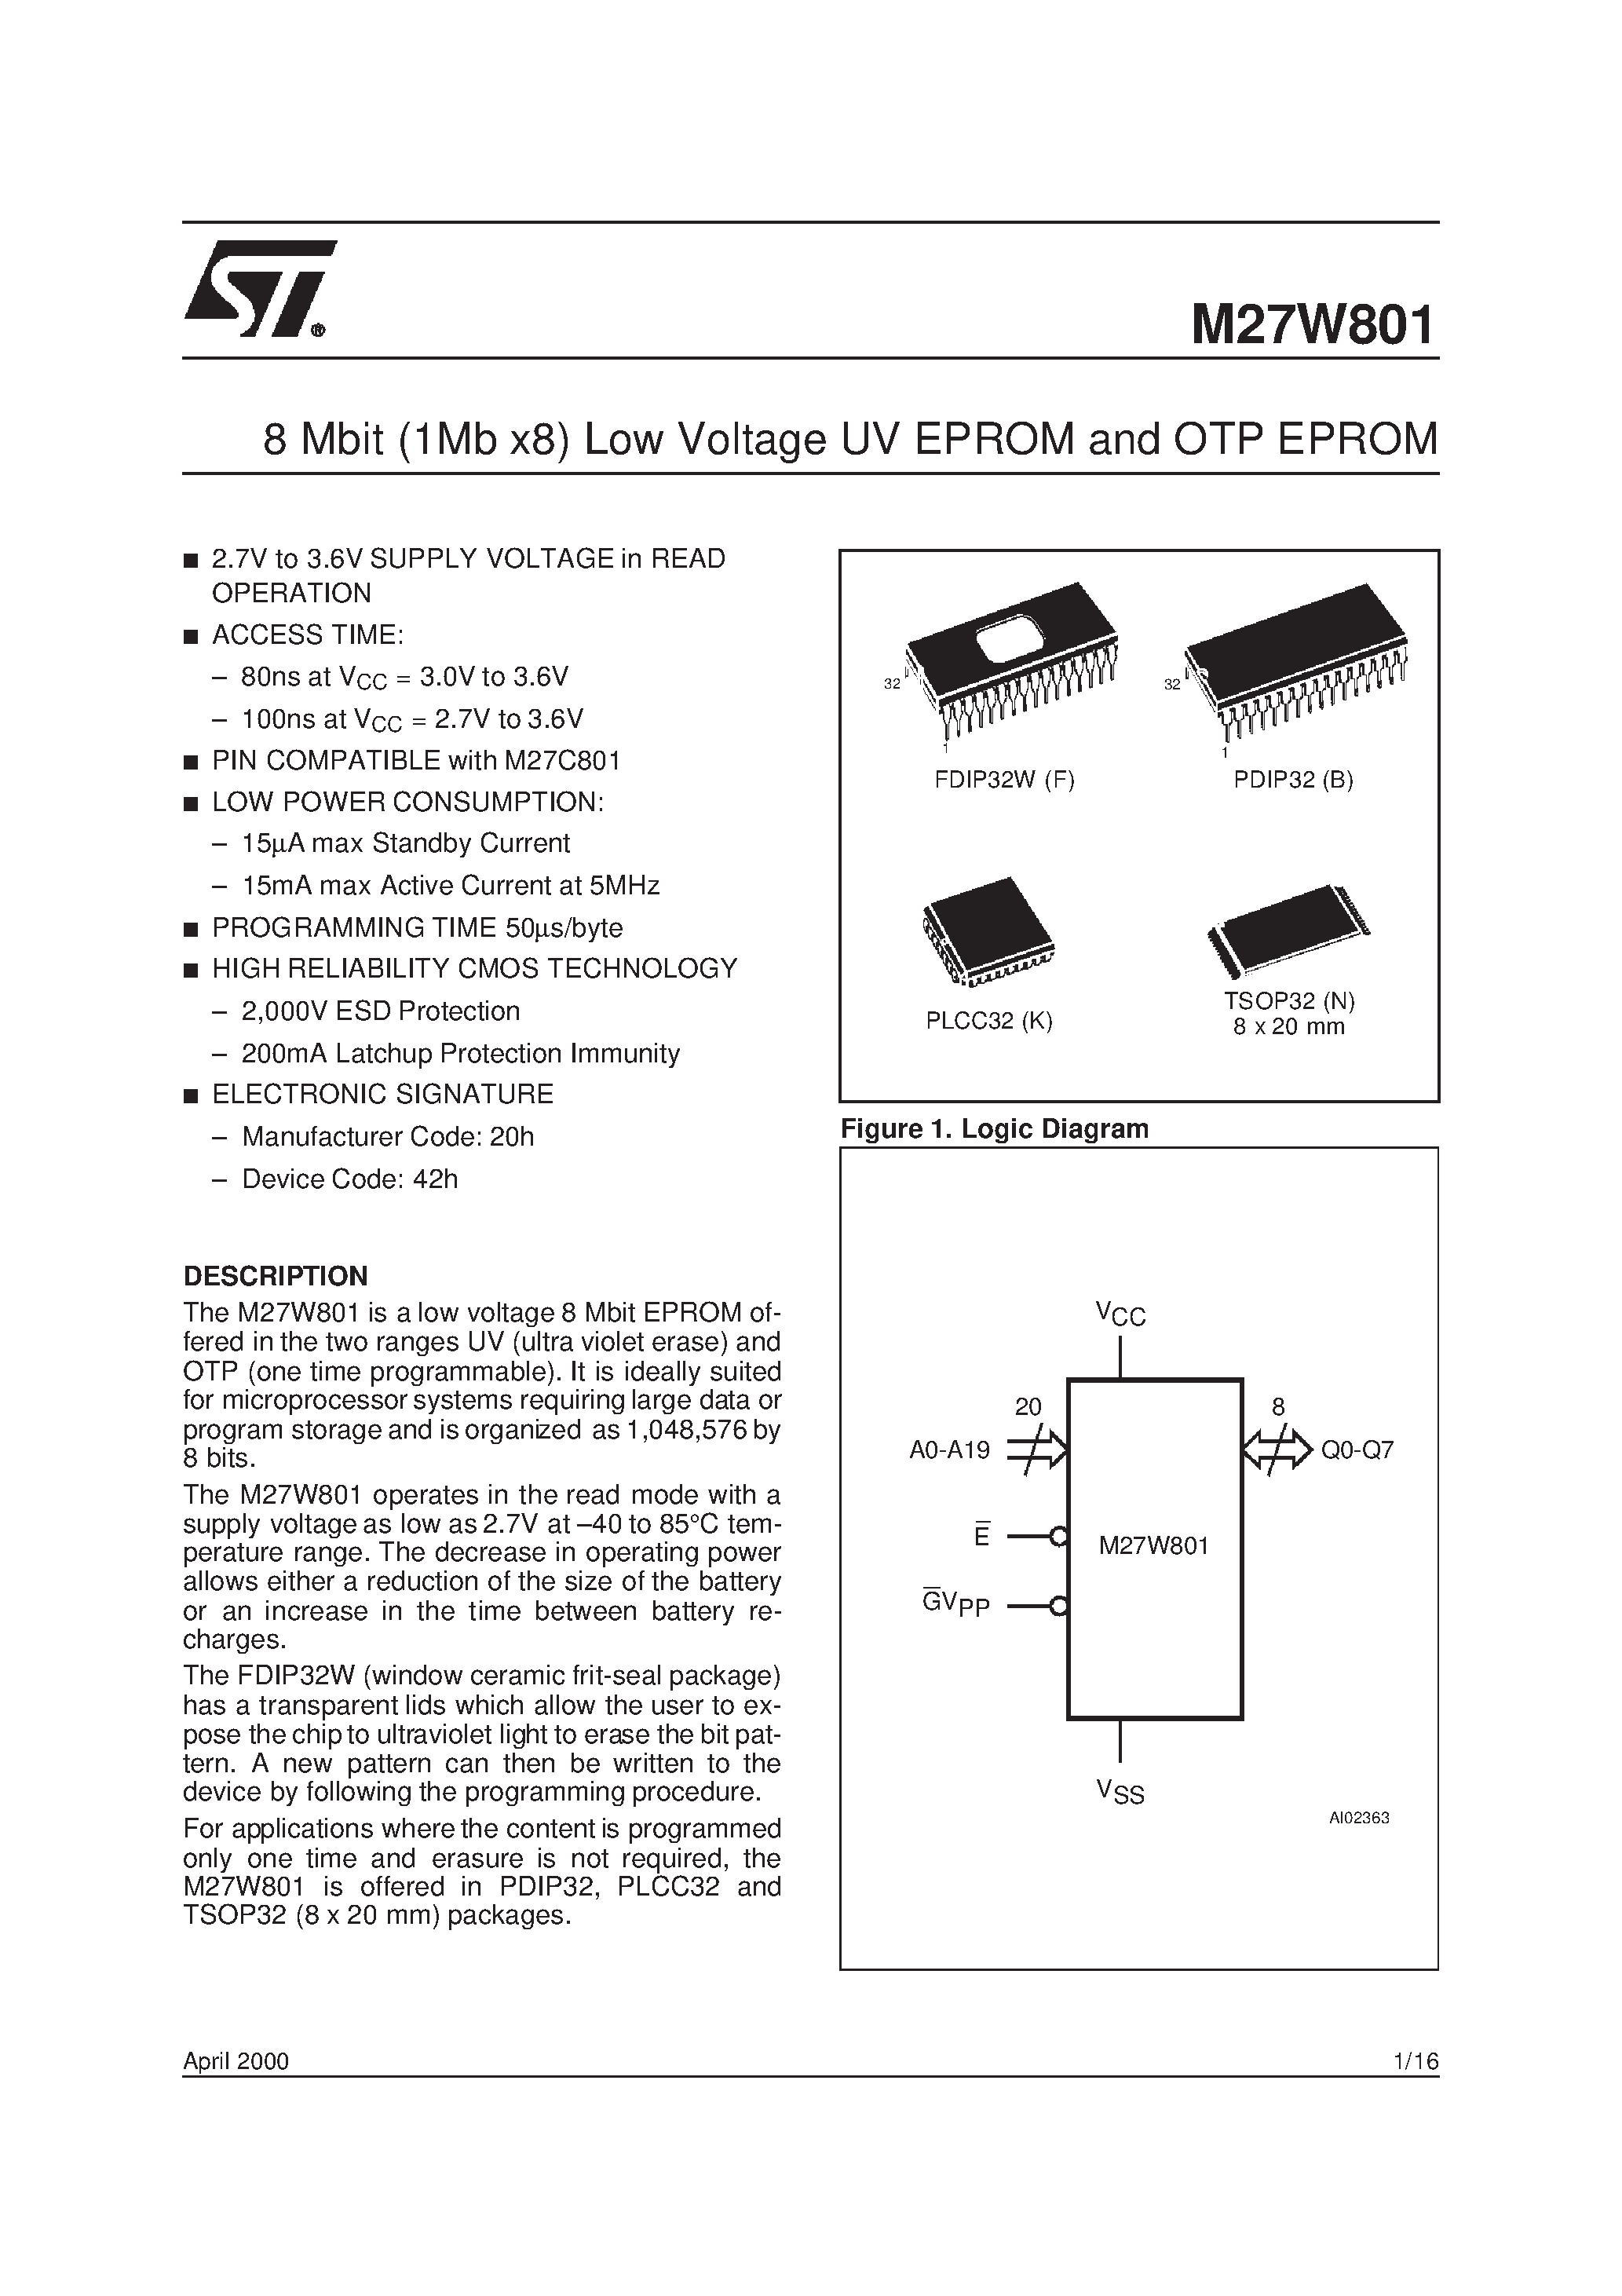 Datasheet M27W801-150N6TR - 8 Mbit 1Mb x8 Low Voltage UV EPROM and OTP EPROM page 1